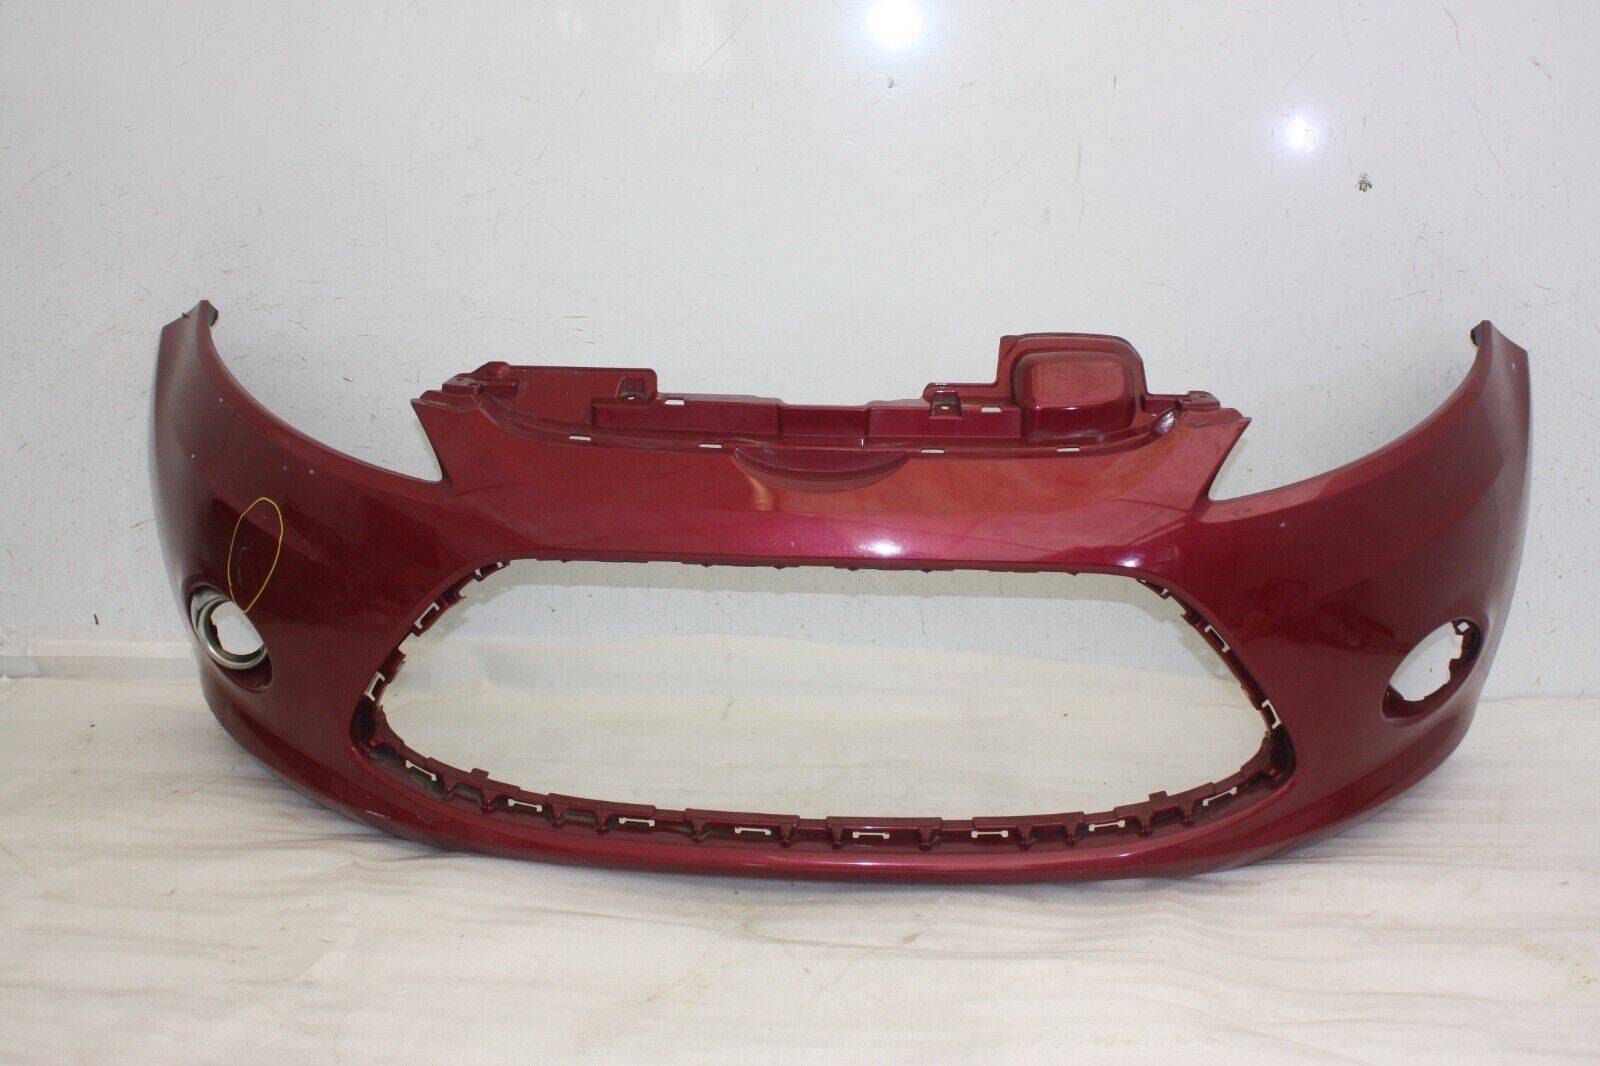 Ford Fiesta Front Bumper 2008 TO 2012 8A61 17K819 Genuine DAMAGED 176298722588